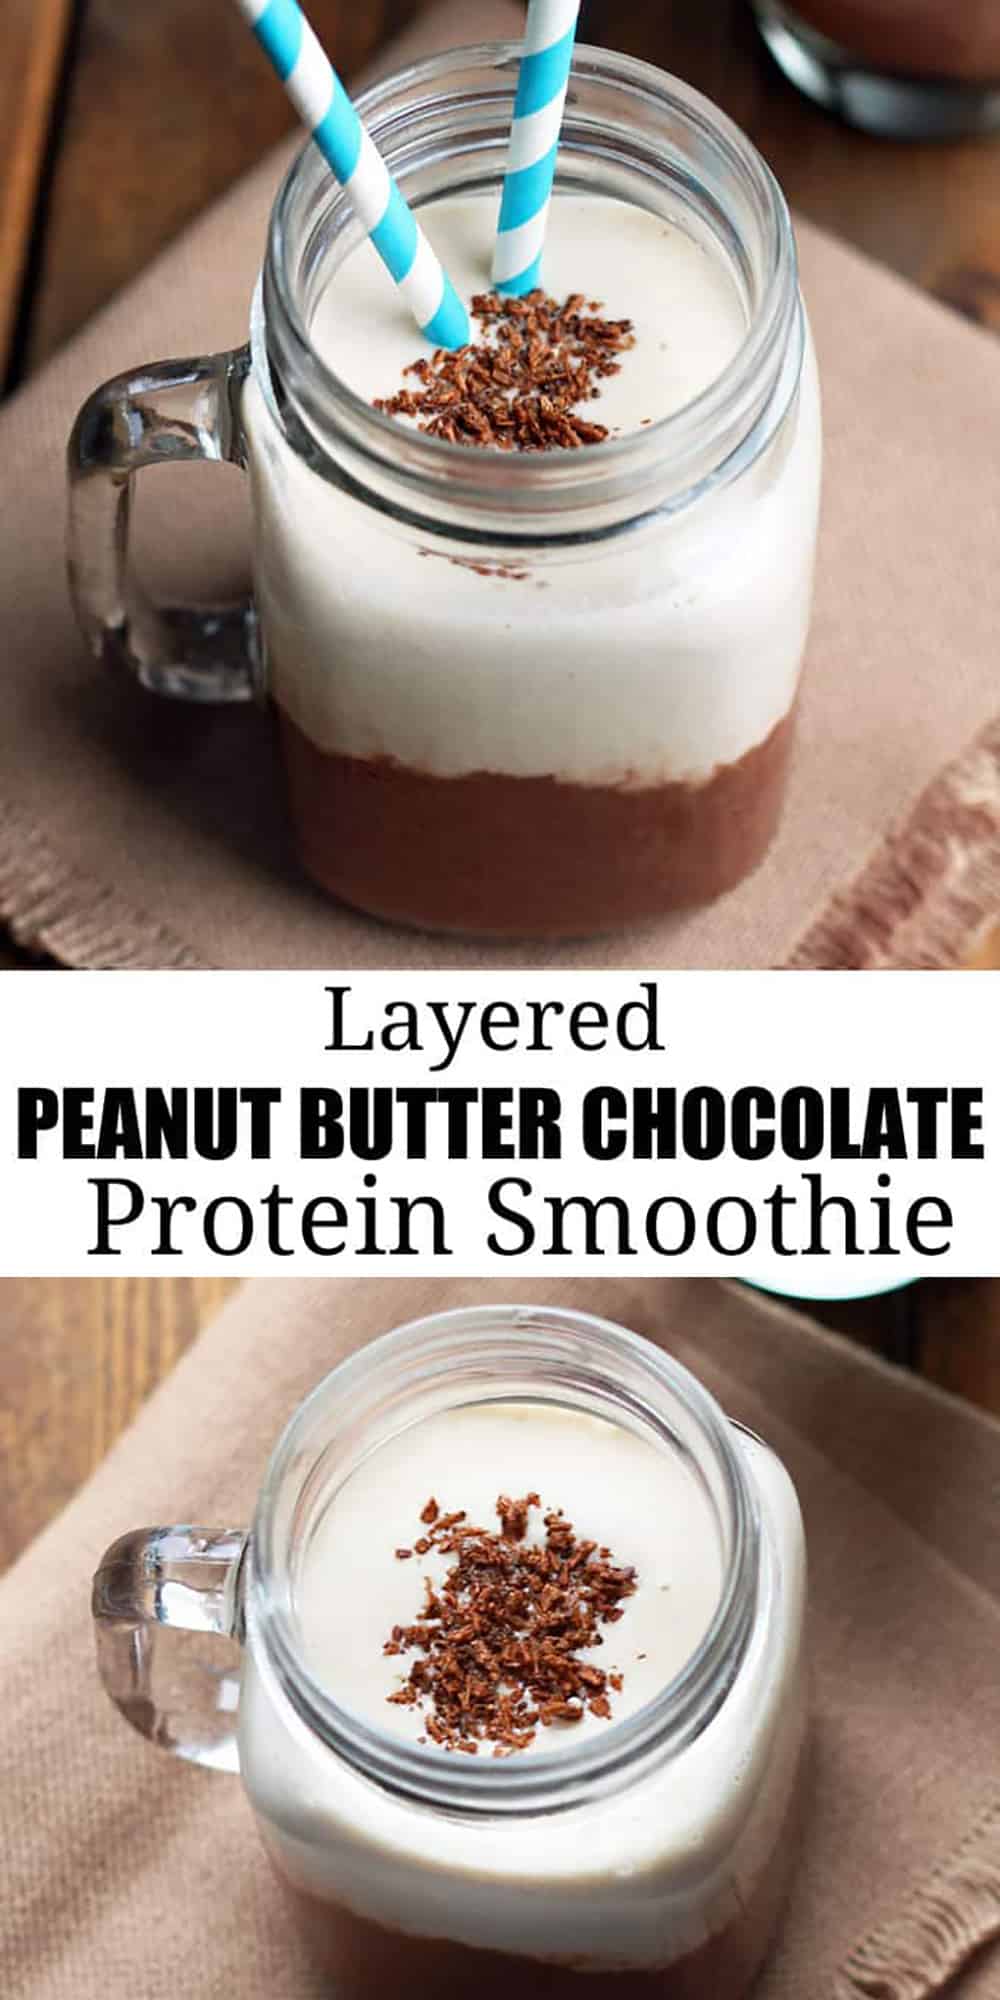 Layered Peanut Butter Chocolate Protein Smoothie